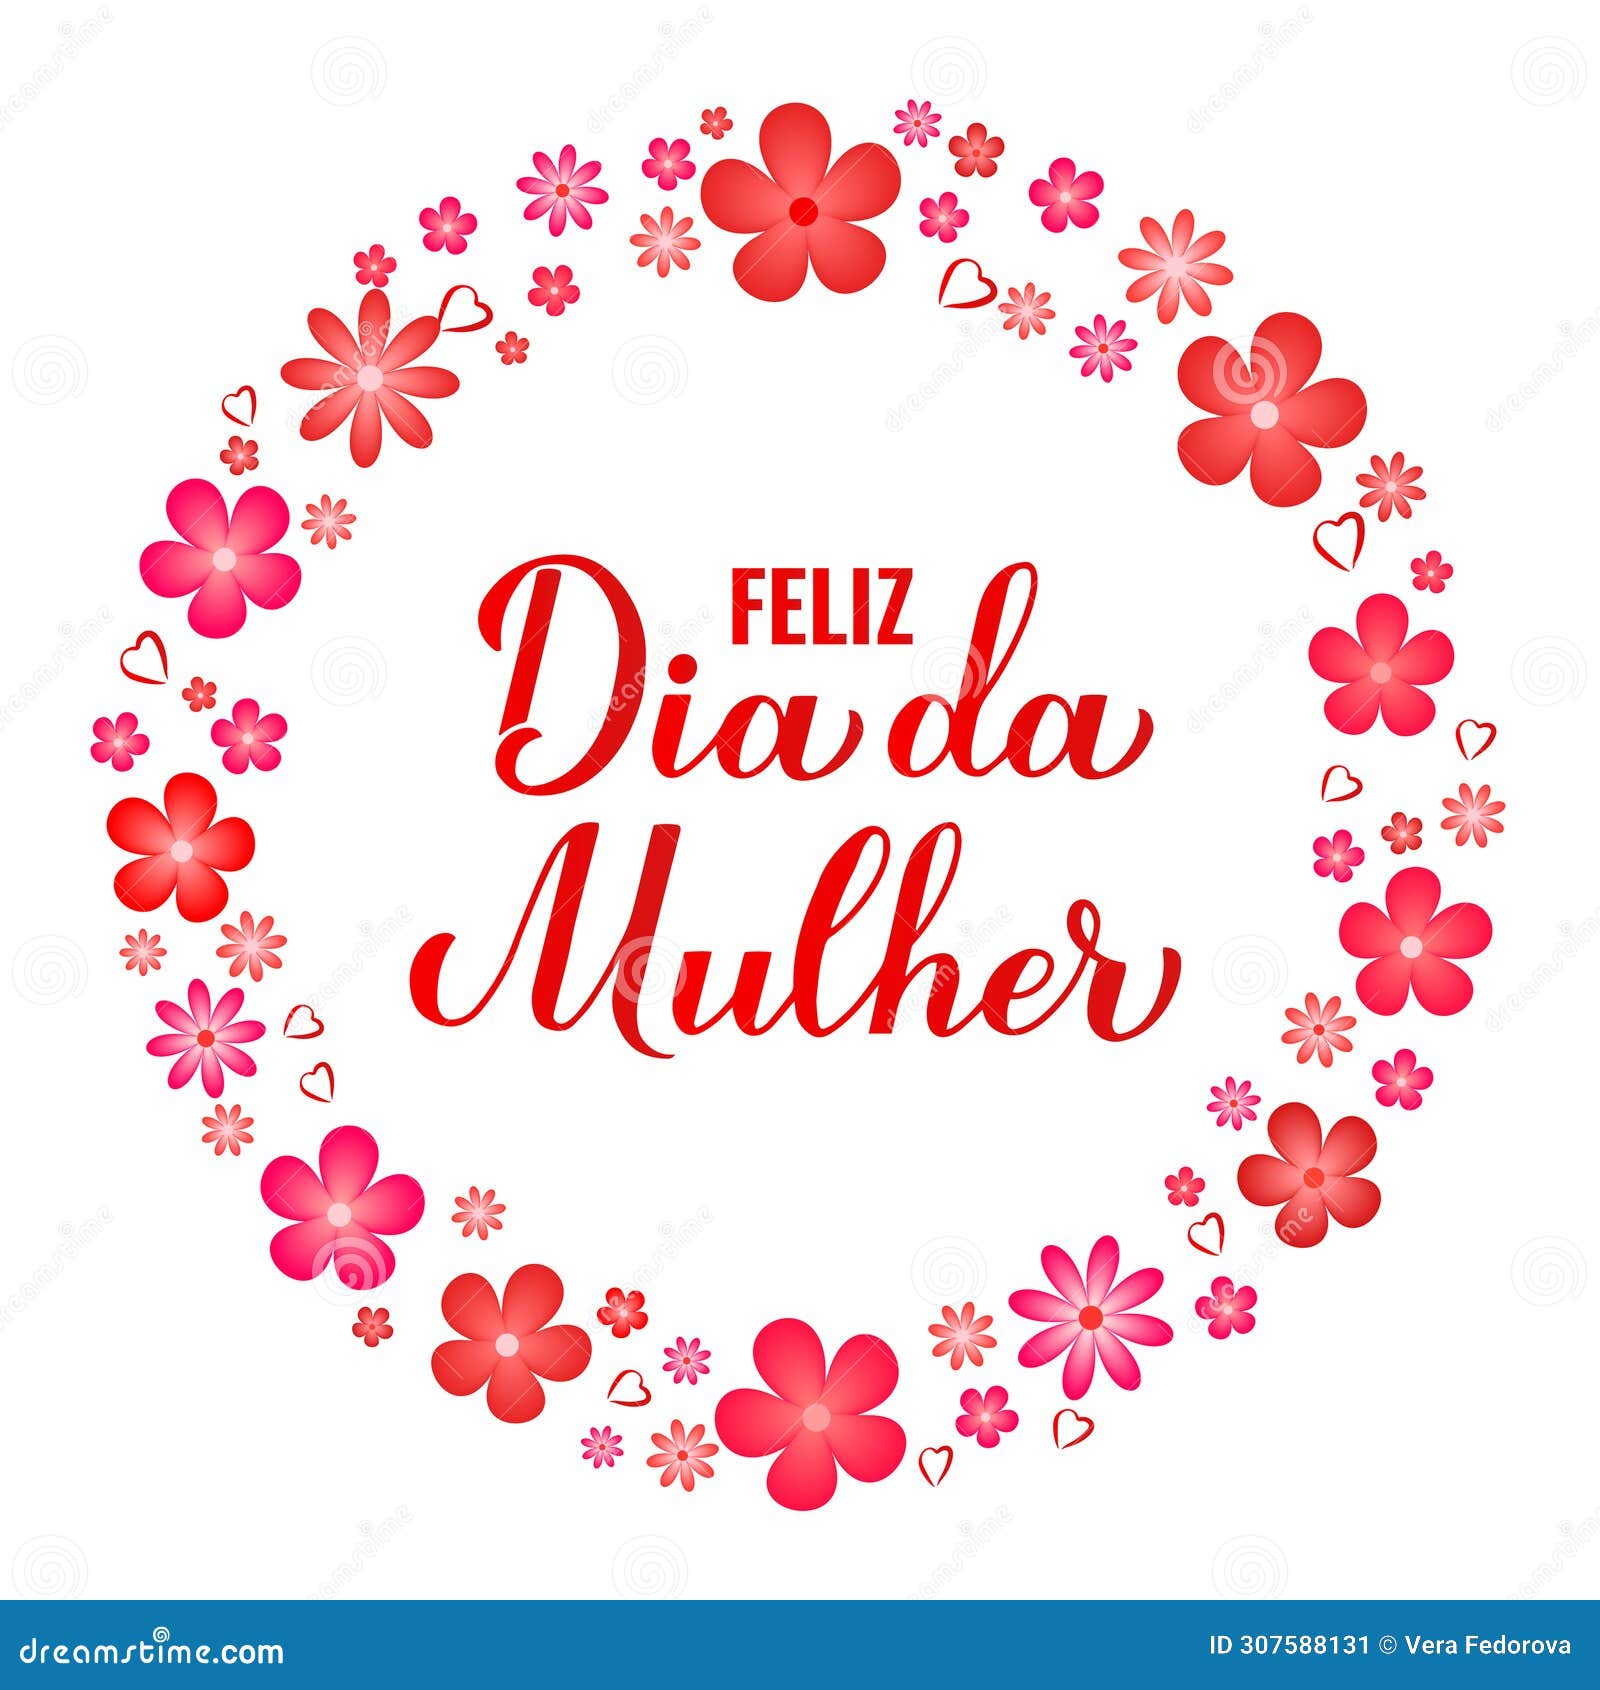 feliz dia da mulher - happy womens day in portuguese. calligraphy hand lettering with spring flowers frame